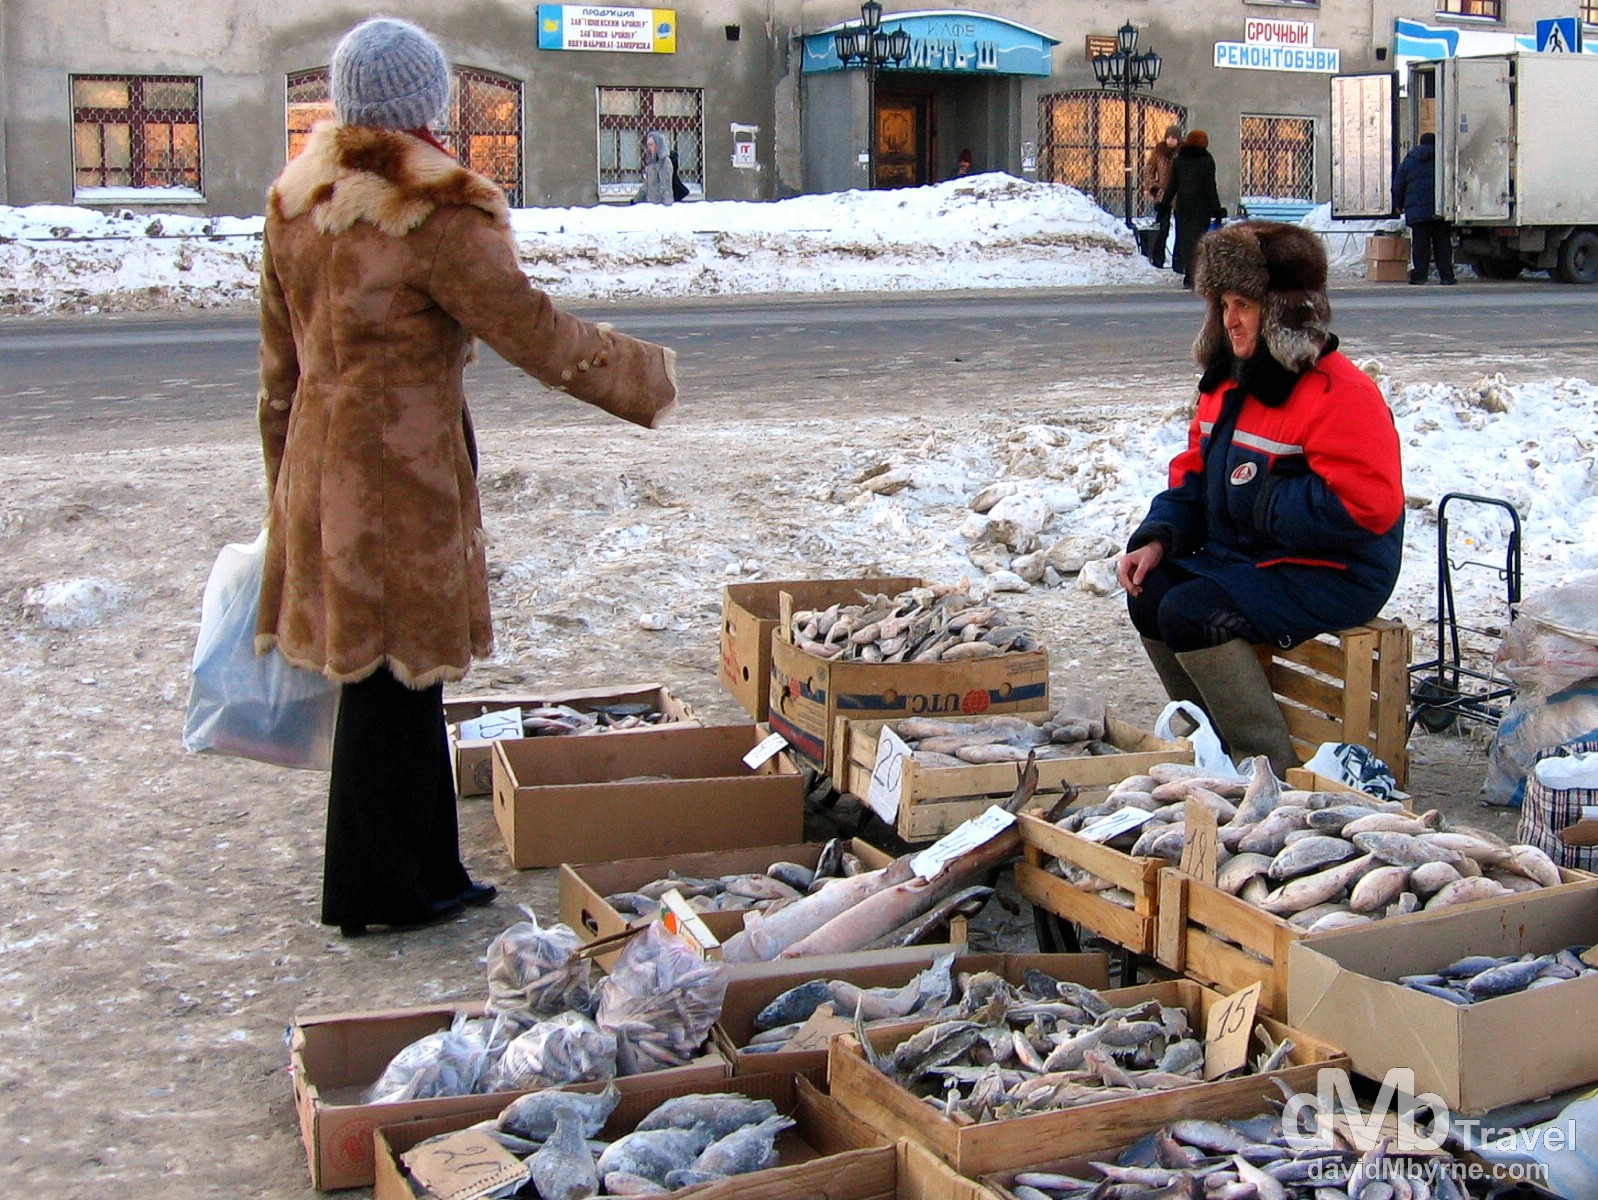 Fish for sale outside the Old Town market in Tobolsk, Siberian Russia. February 22, 2006.